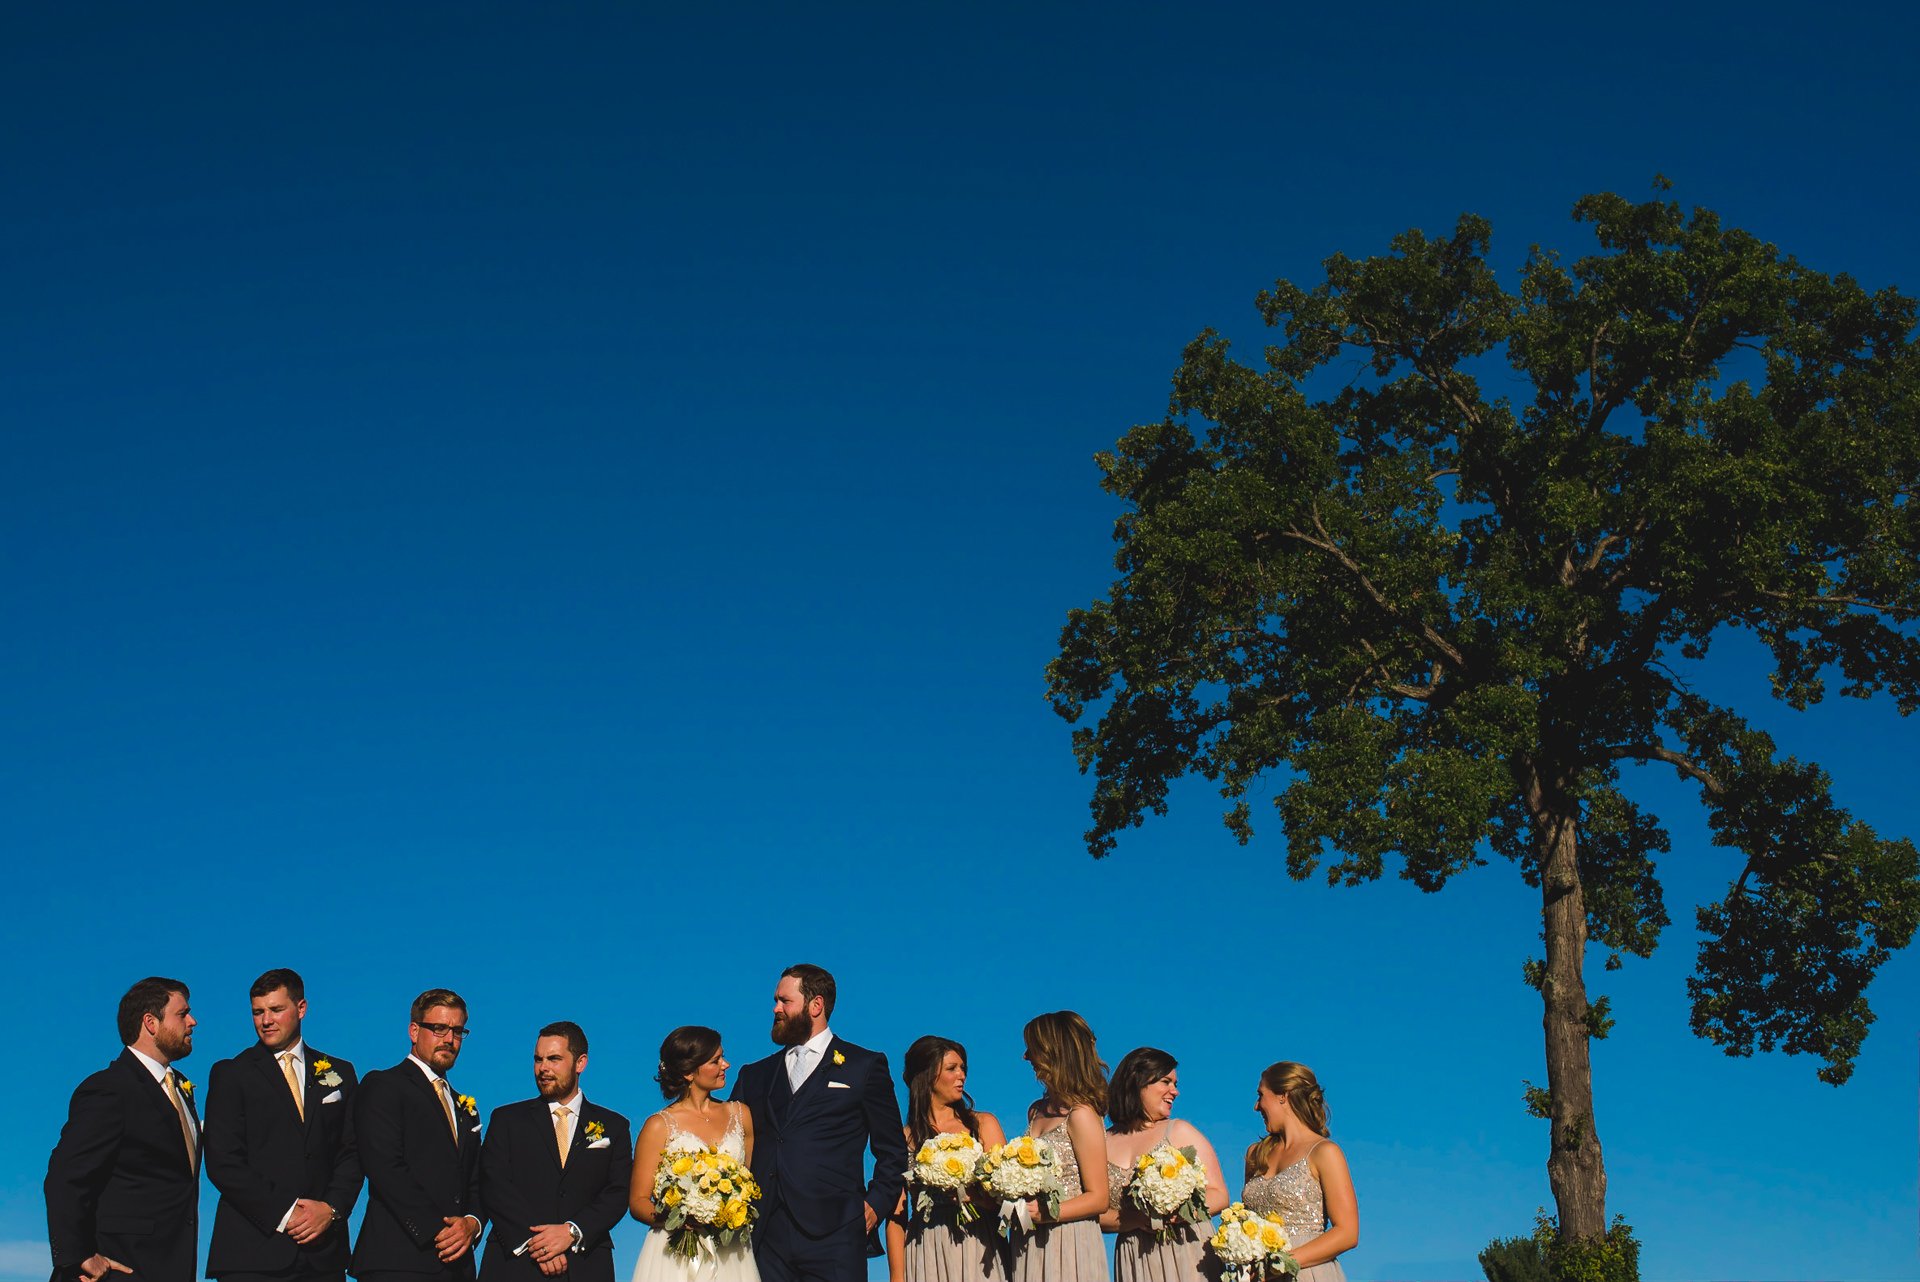 Sunshine's smile and perfect style; this bridal party has it all for a while!